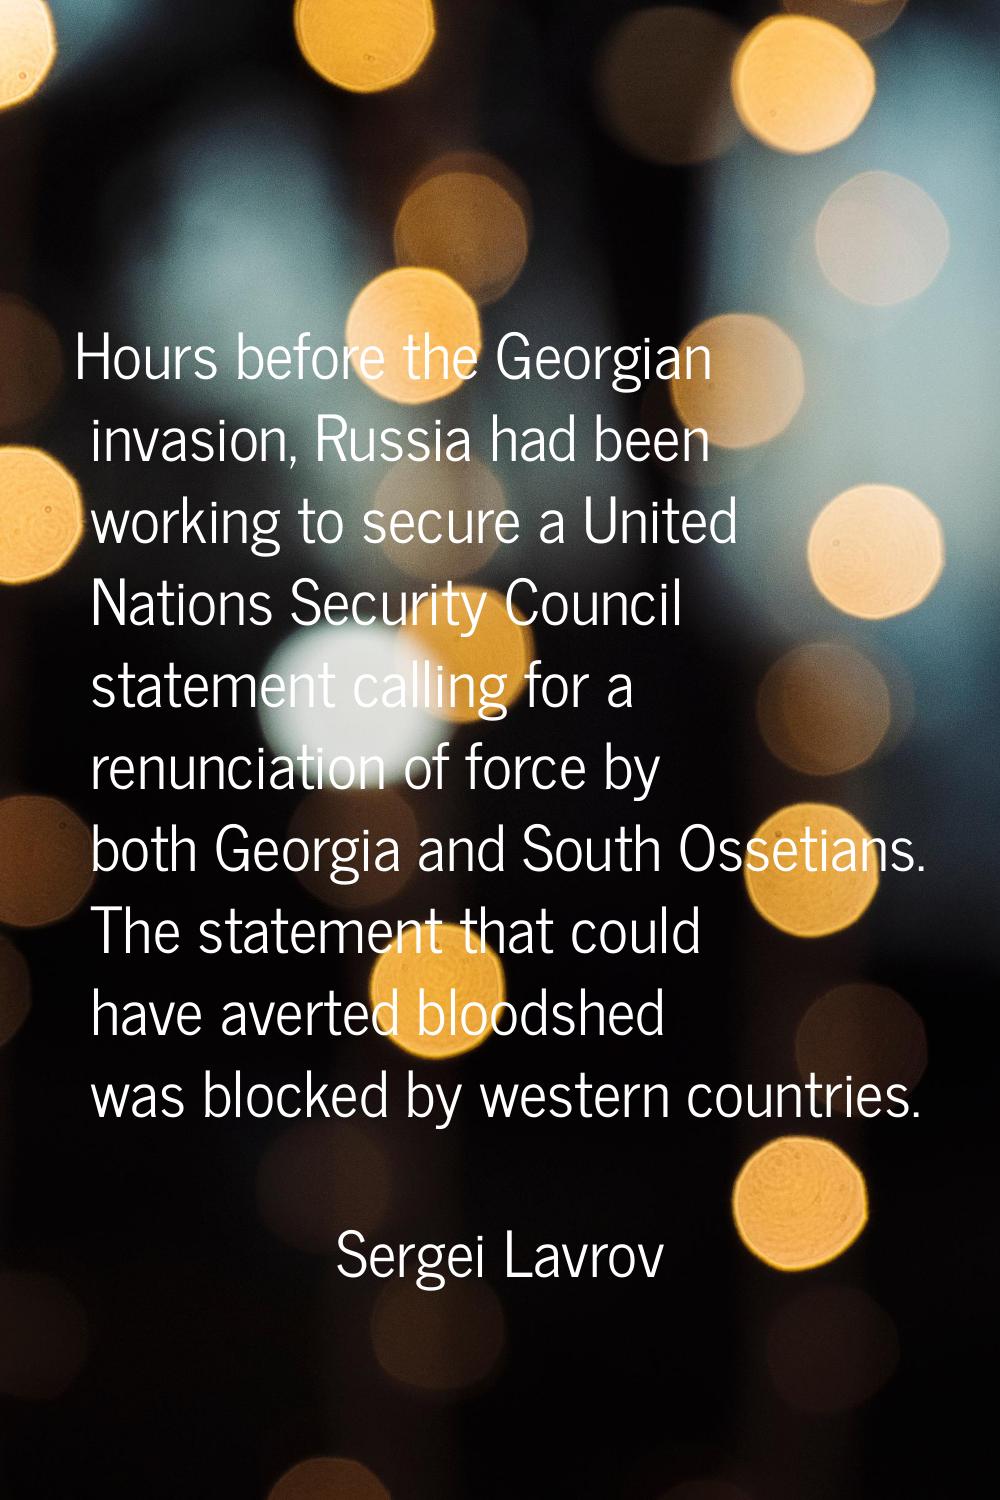 Hours before the Georgian invasion, Russia had been working to secure a United Nations Security Cou